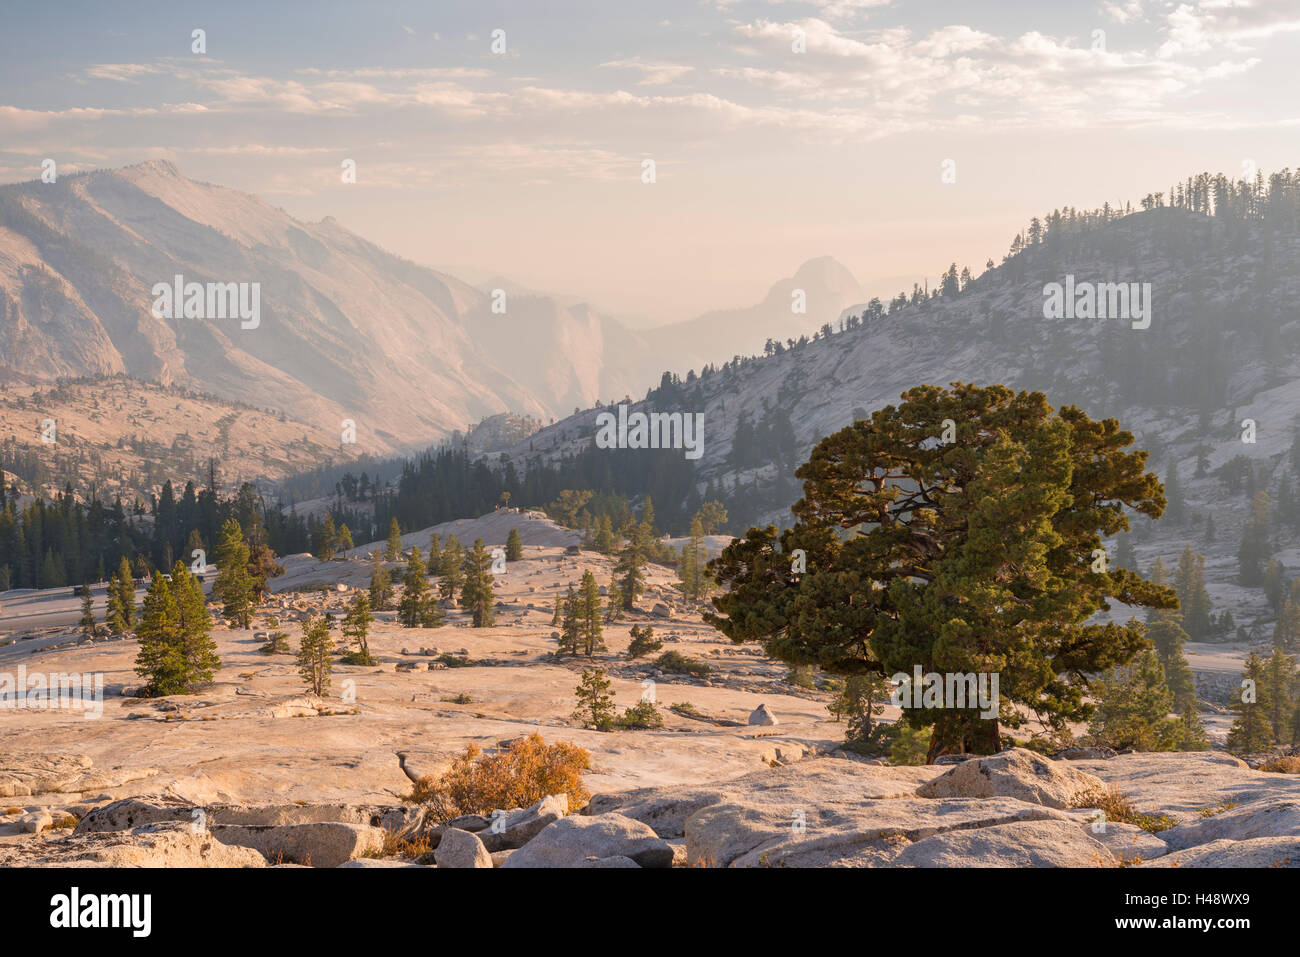 Half Dome and Clouds Rest mountains from Olmsted Point, Yosemite National Park, California, USA. Autumn (October) 2014. Stock Photo